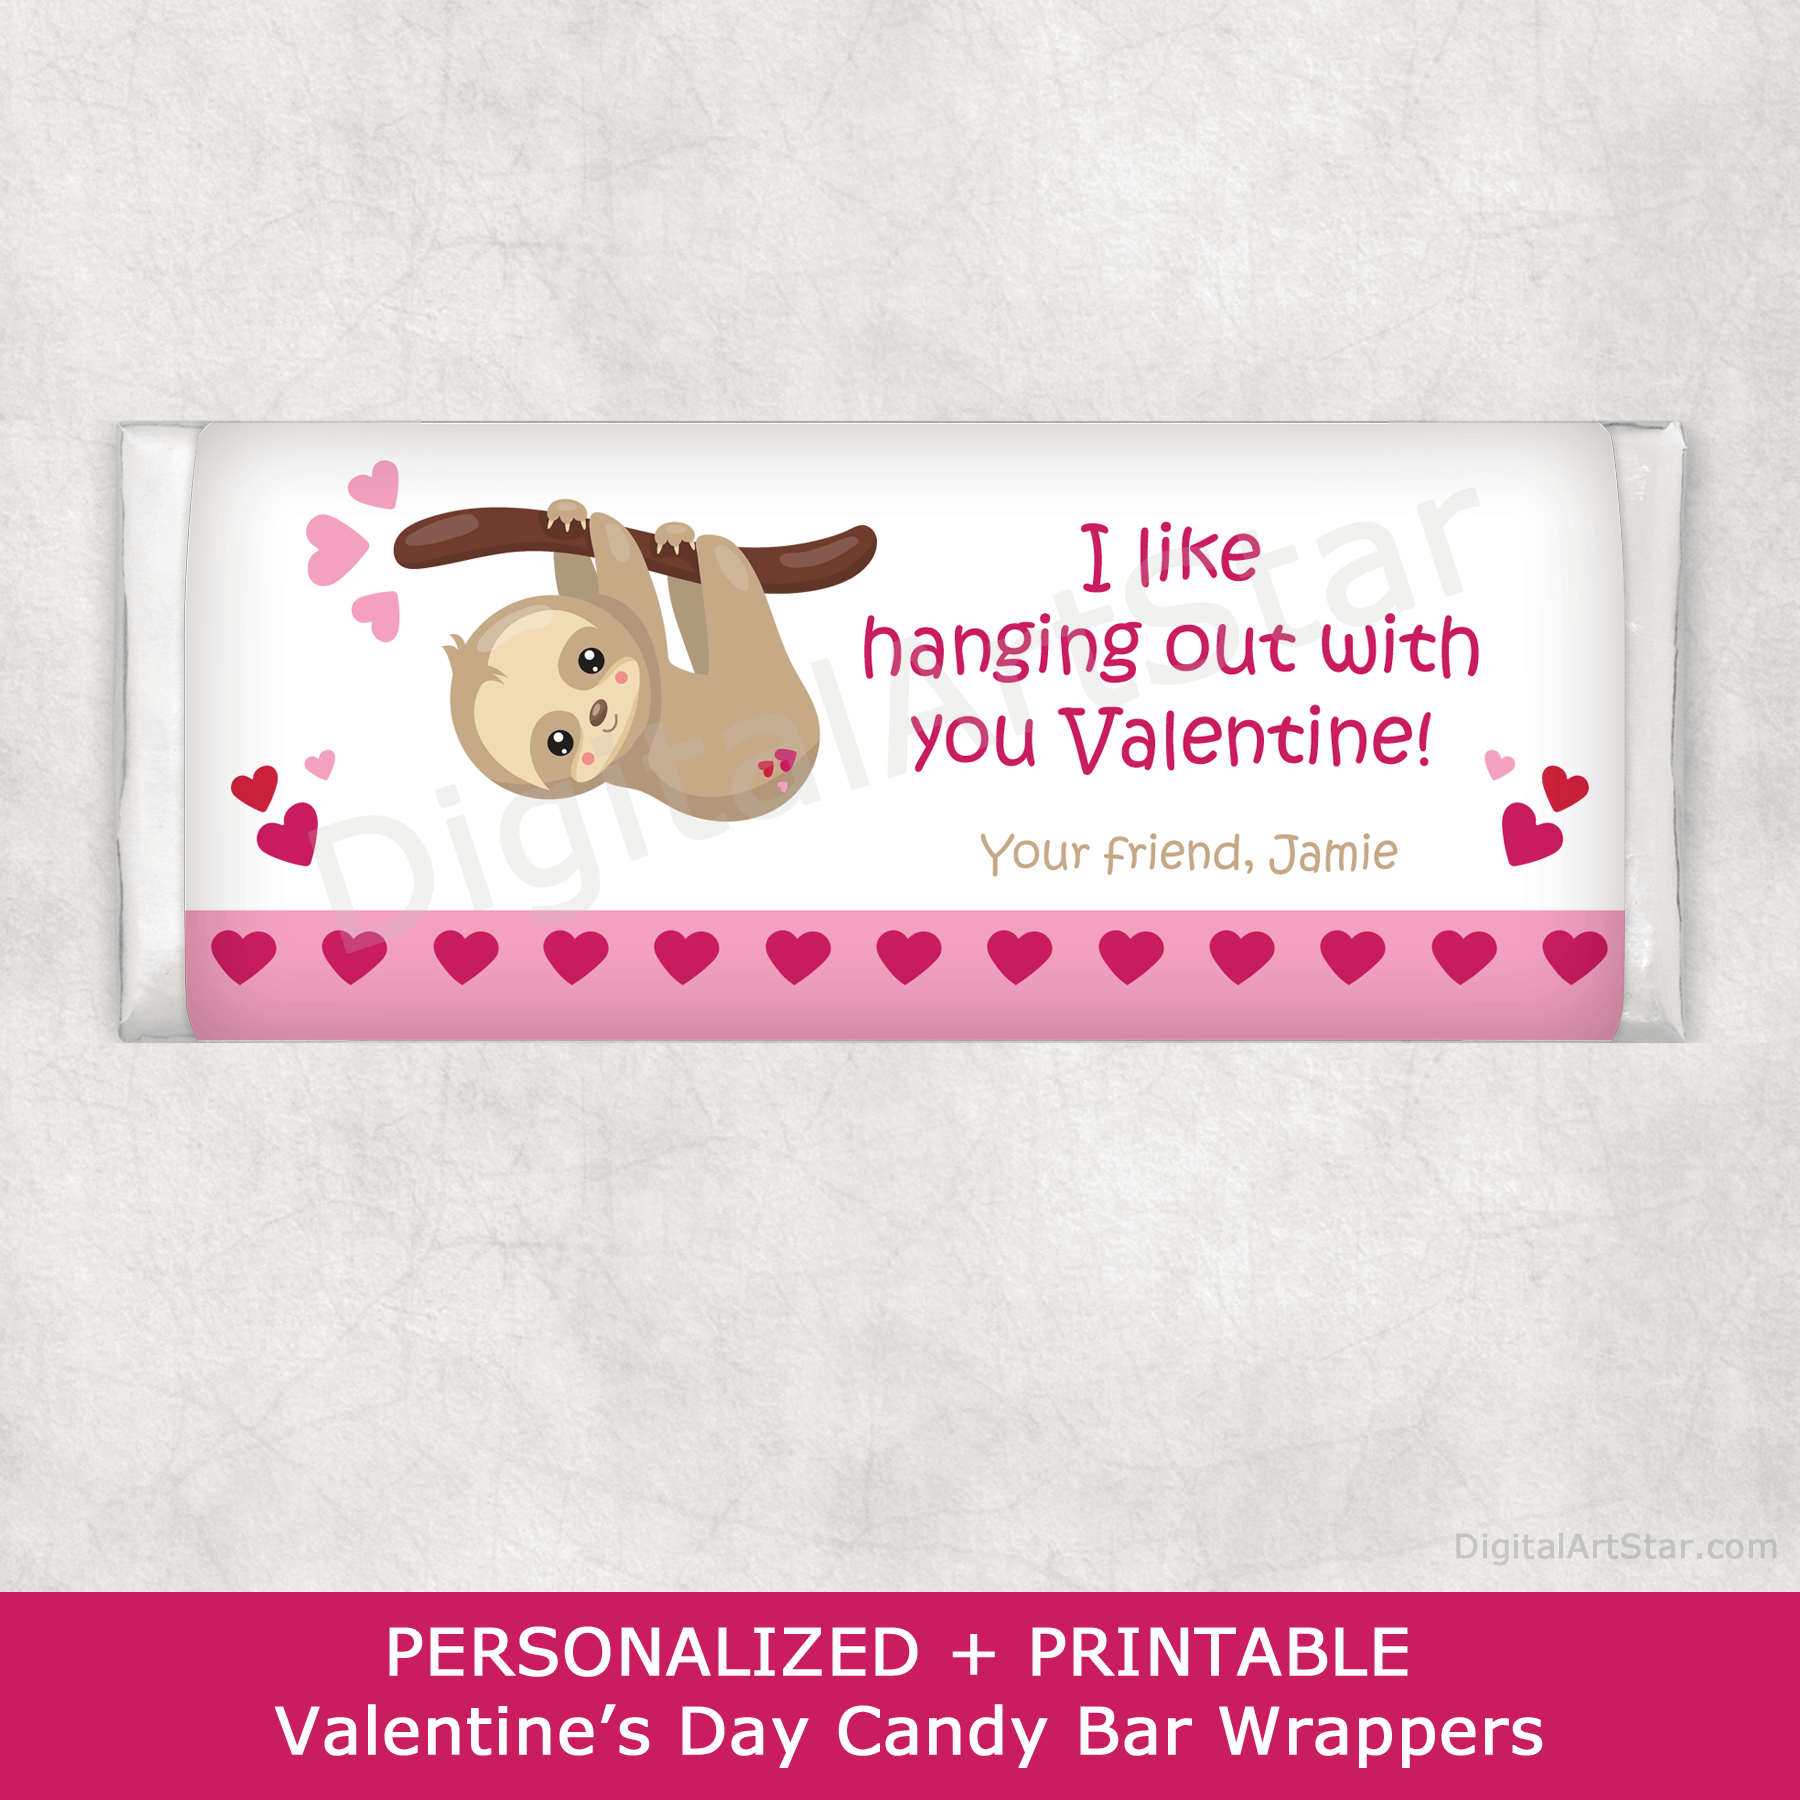 Personalized Valentine Sloth Candy Bar Wrappers to Print